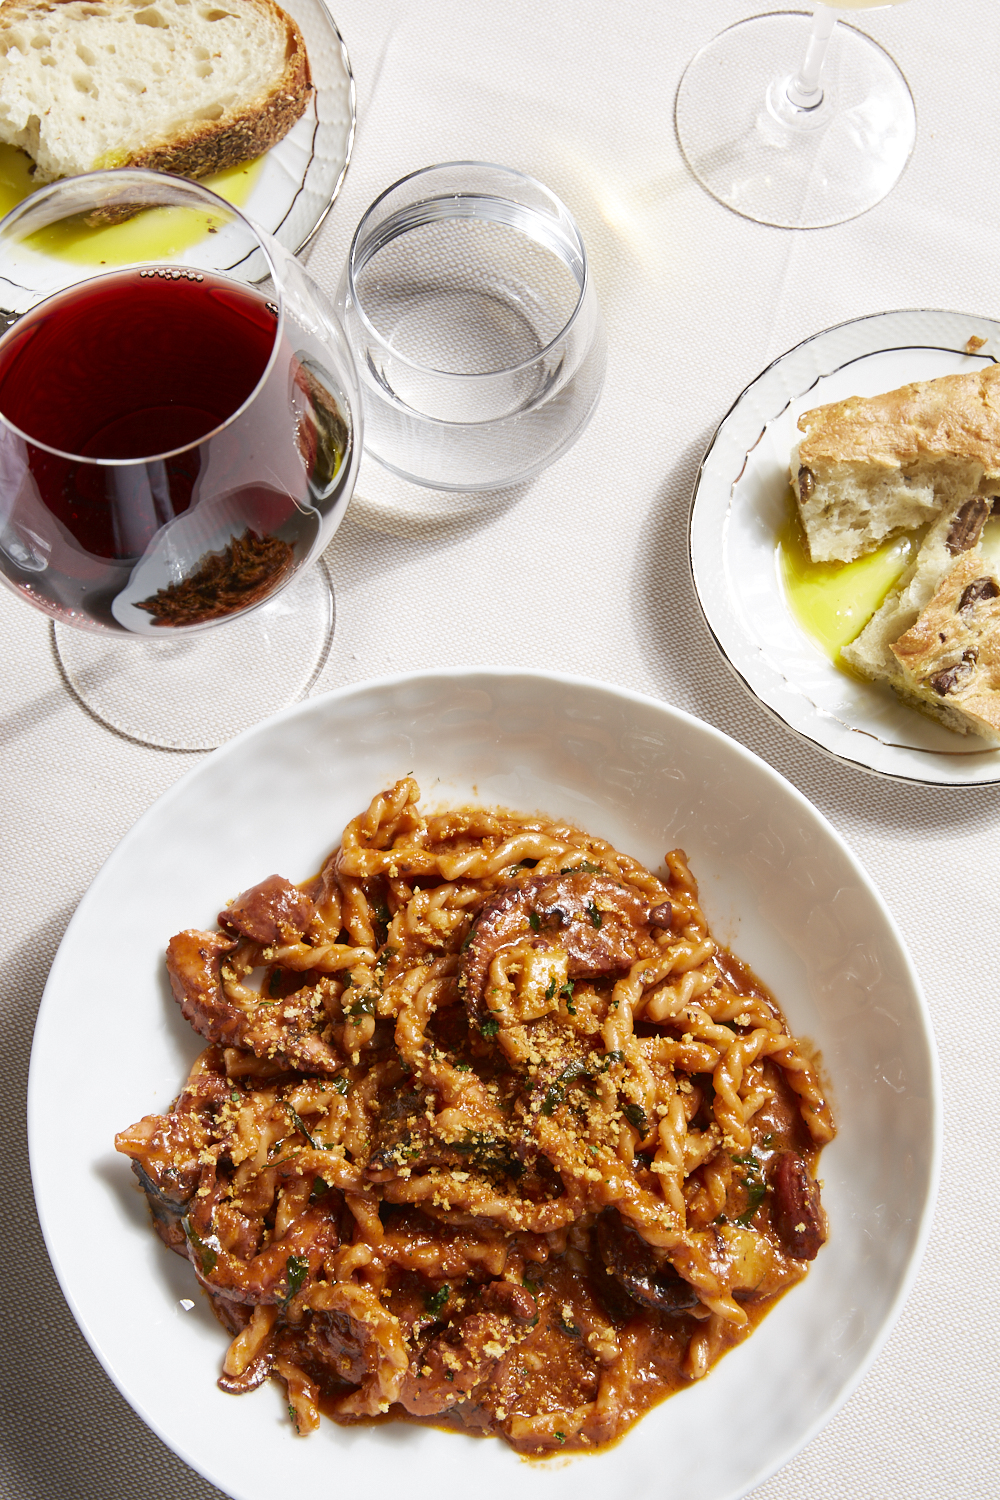 A plate of pasta, some bread, and wine.